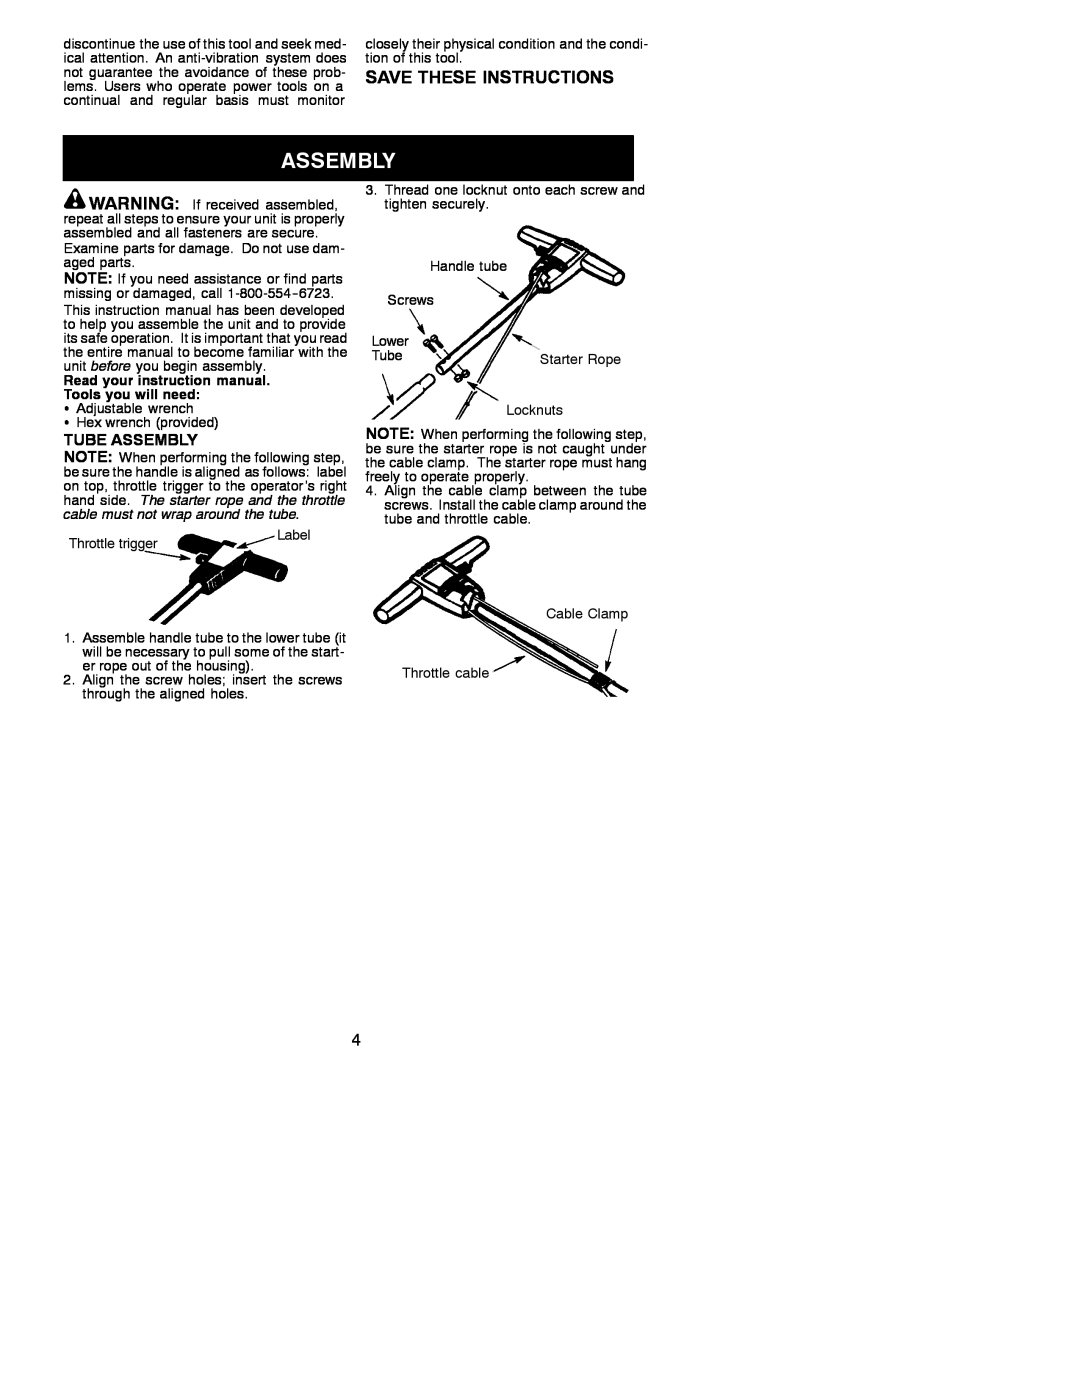 Weed Eater PE550 instruction manual Save These Instructions, Tube Assembly 